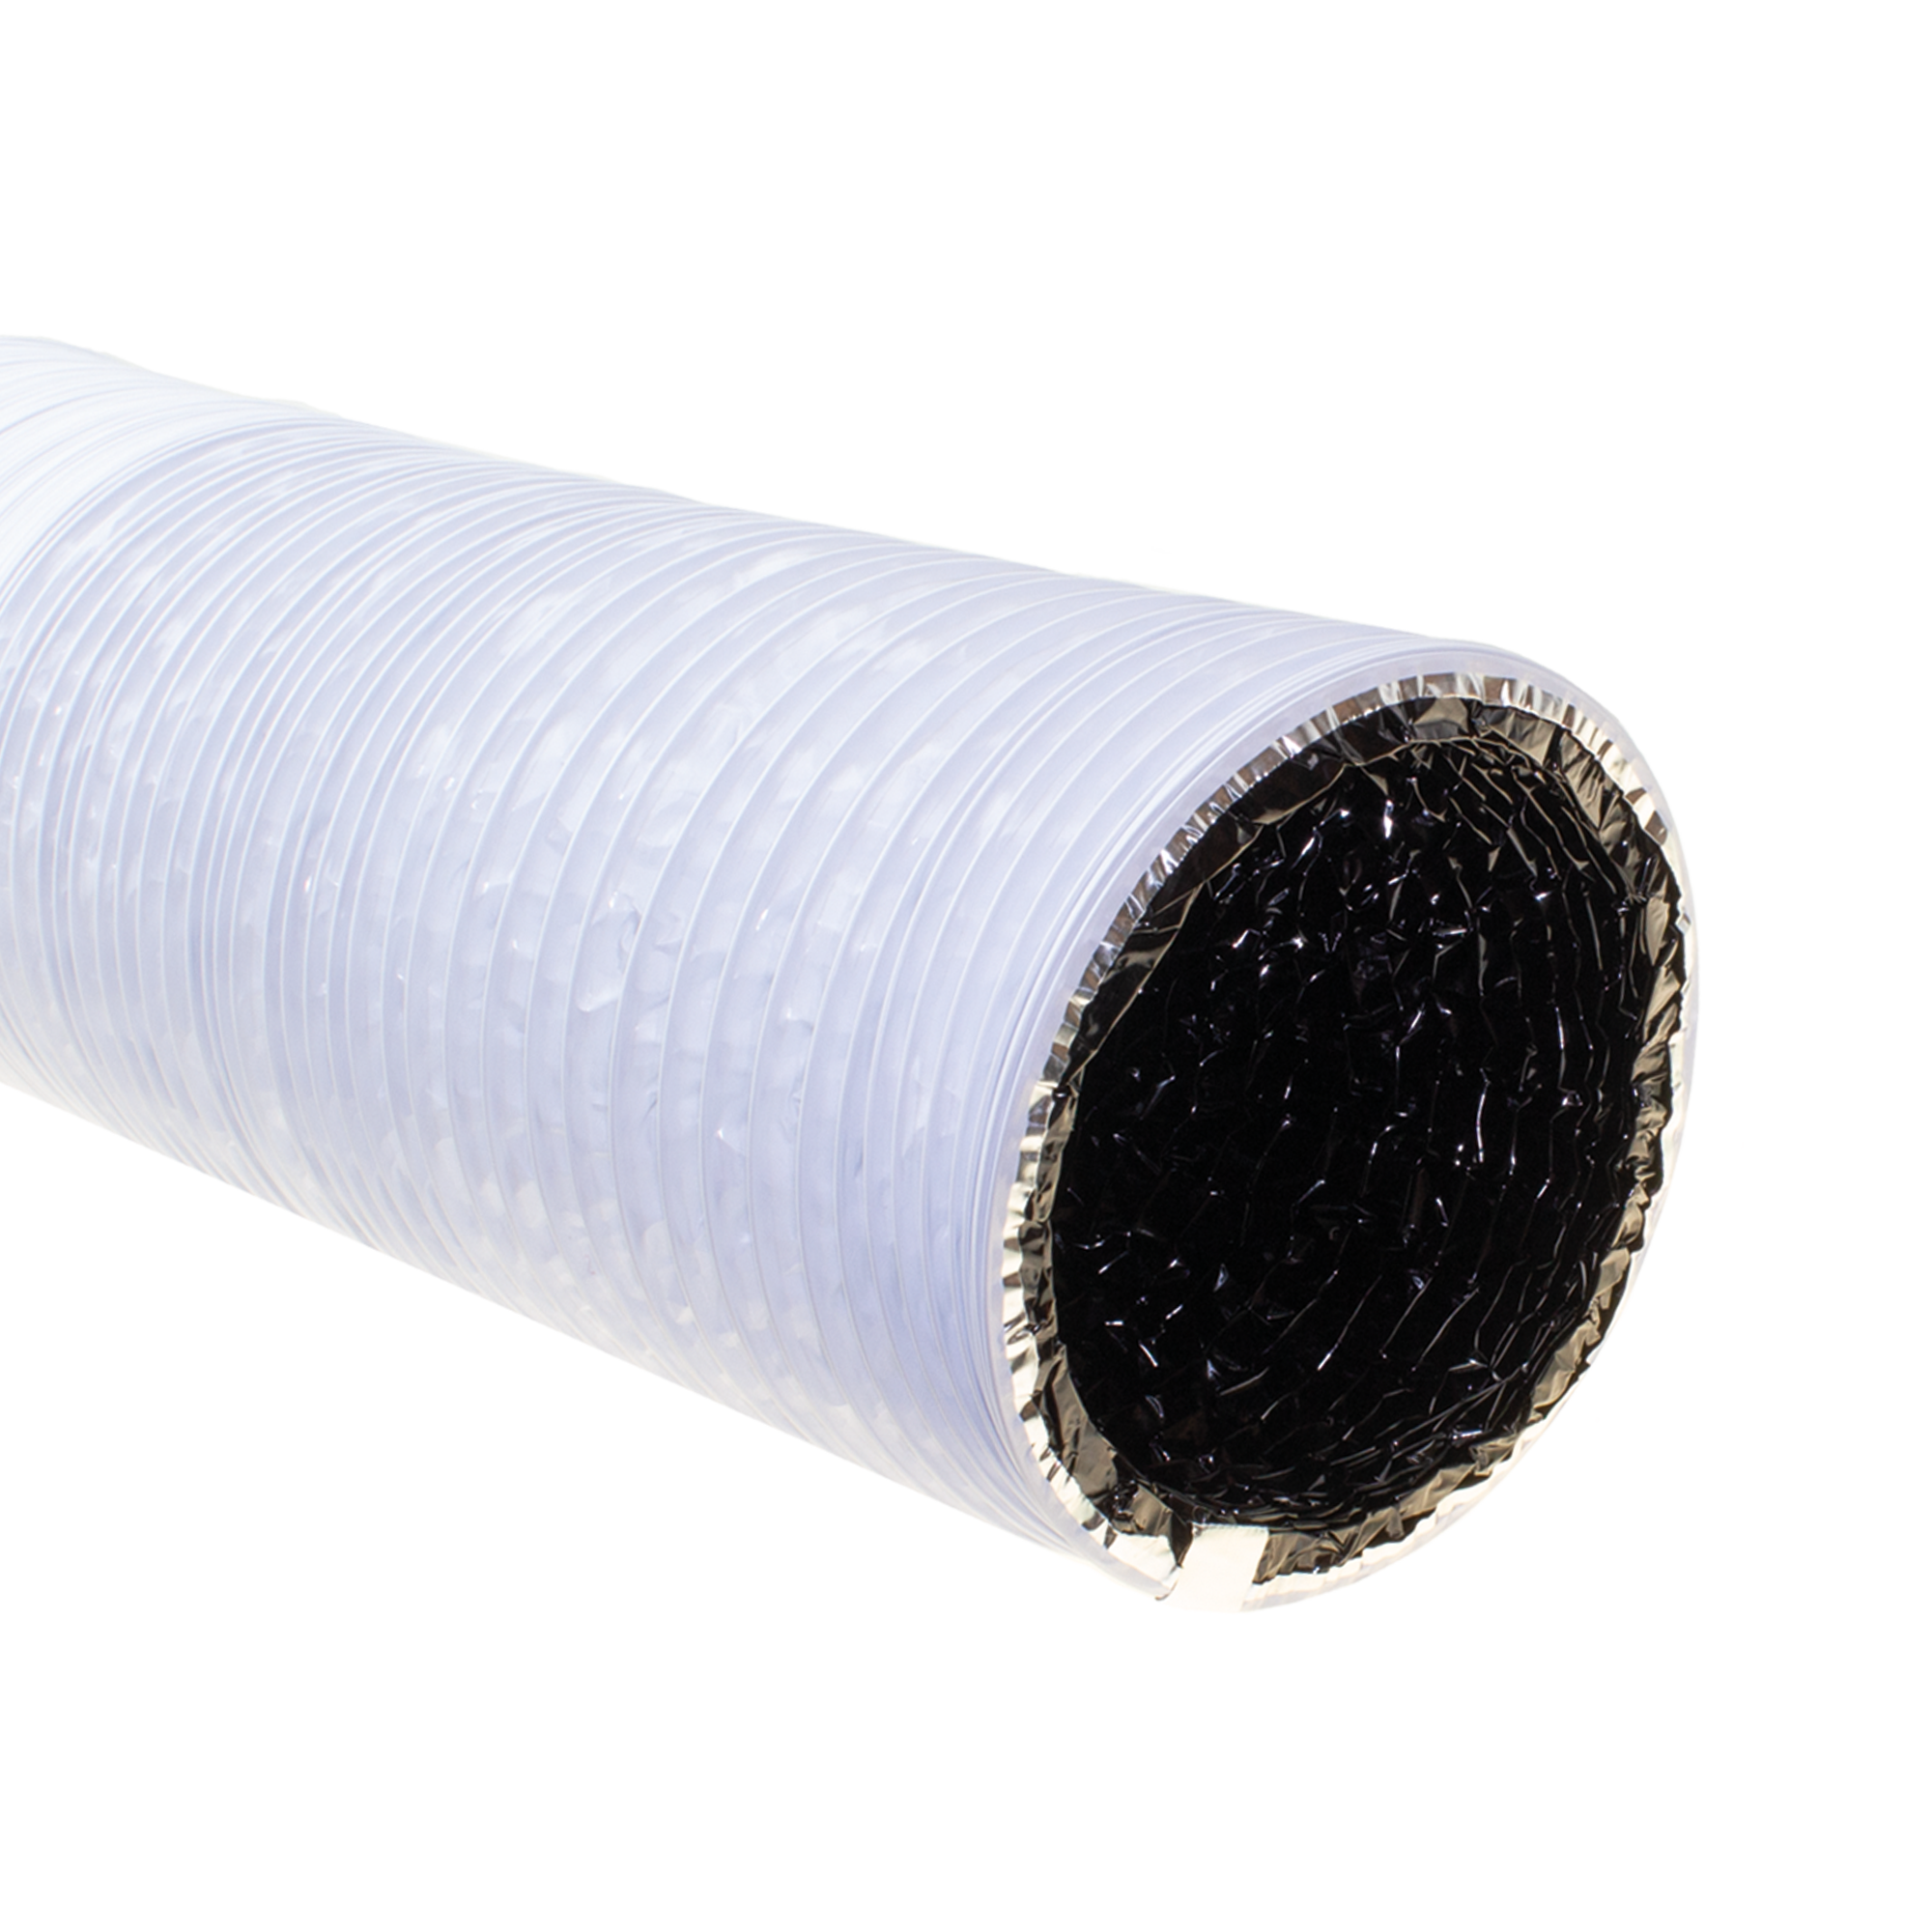 G.A.S White - Black Combi Ducting